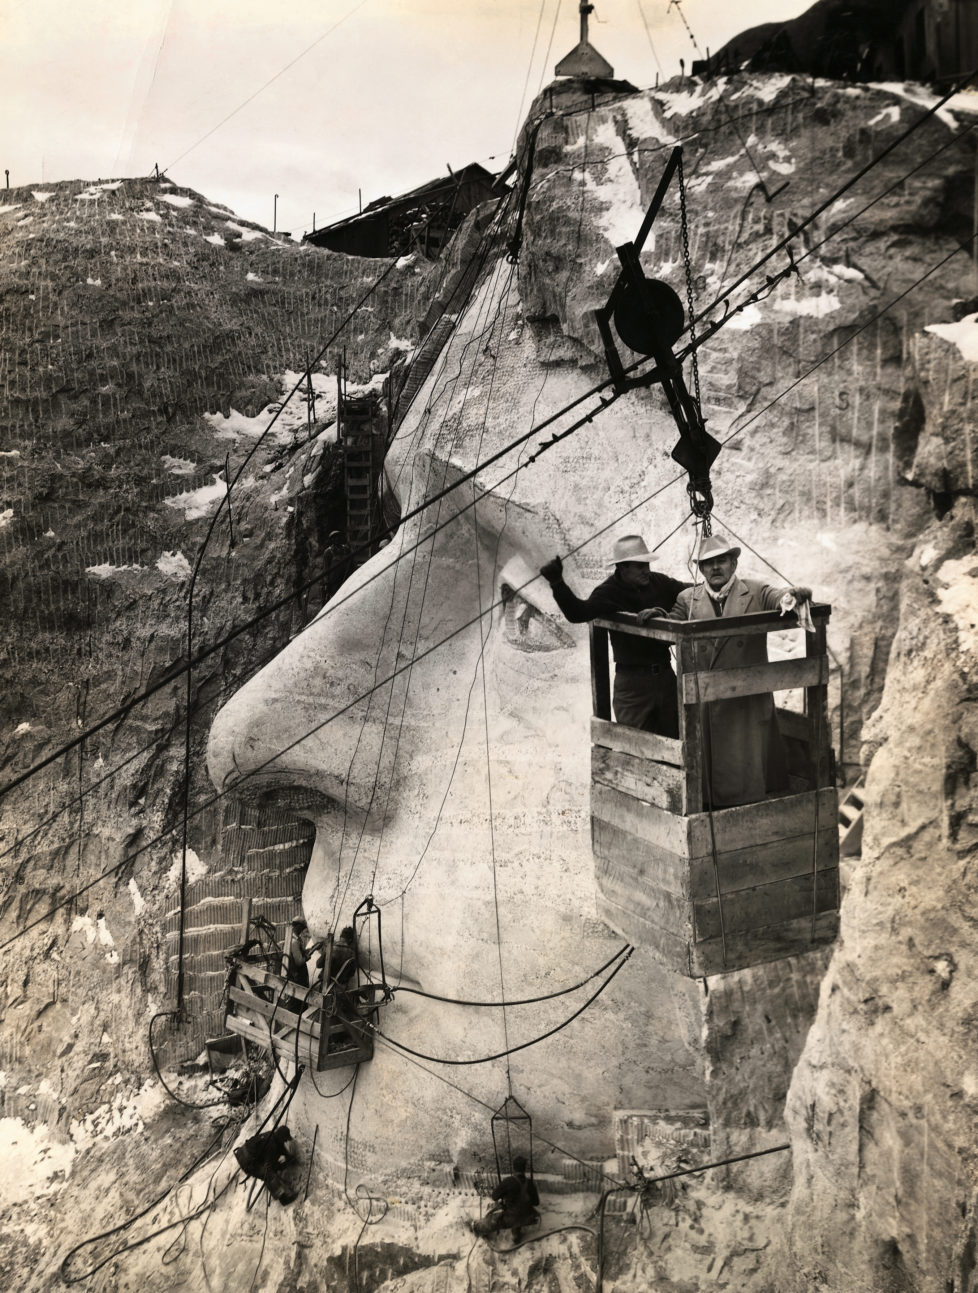 American sculptor Gutzon Borglum, who is leading the Mount Rushmore National Memorial project, and his son, Lincoln, inspect the Jefferson head from an aerial tram. (Photo by George Rinhart/Corbis via Getty Images)